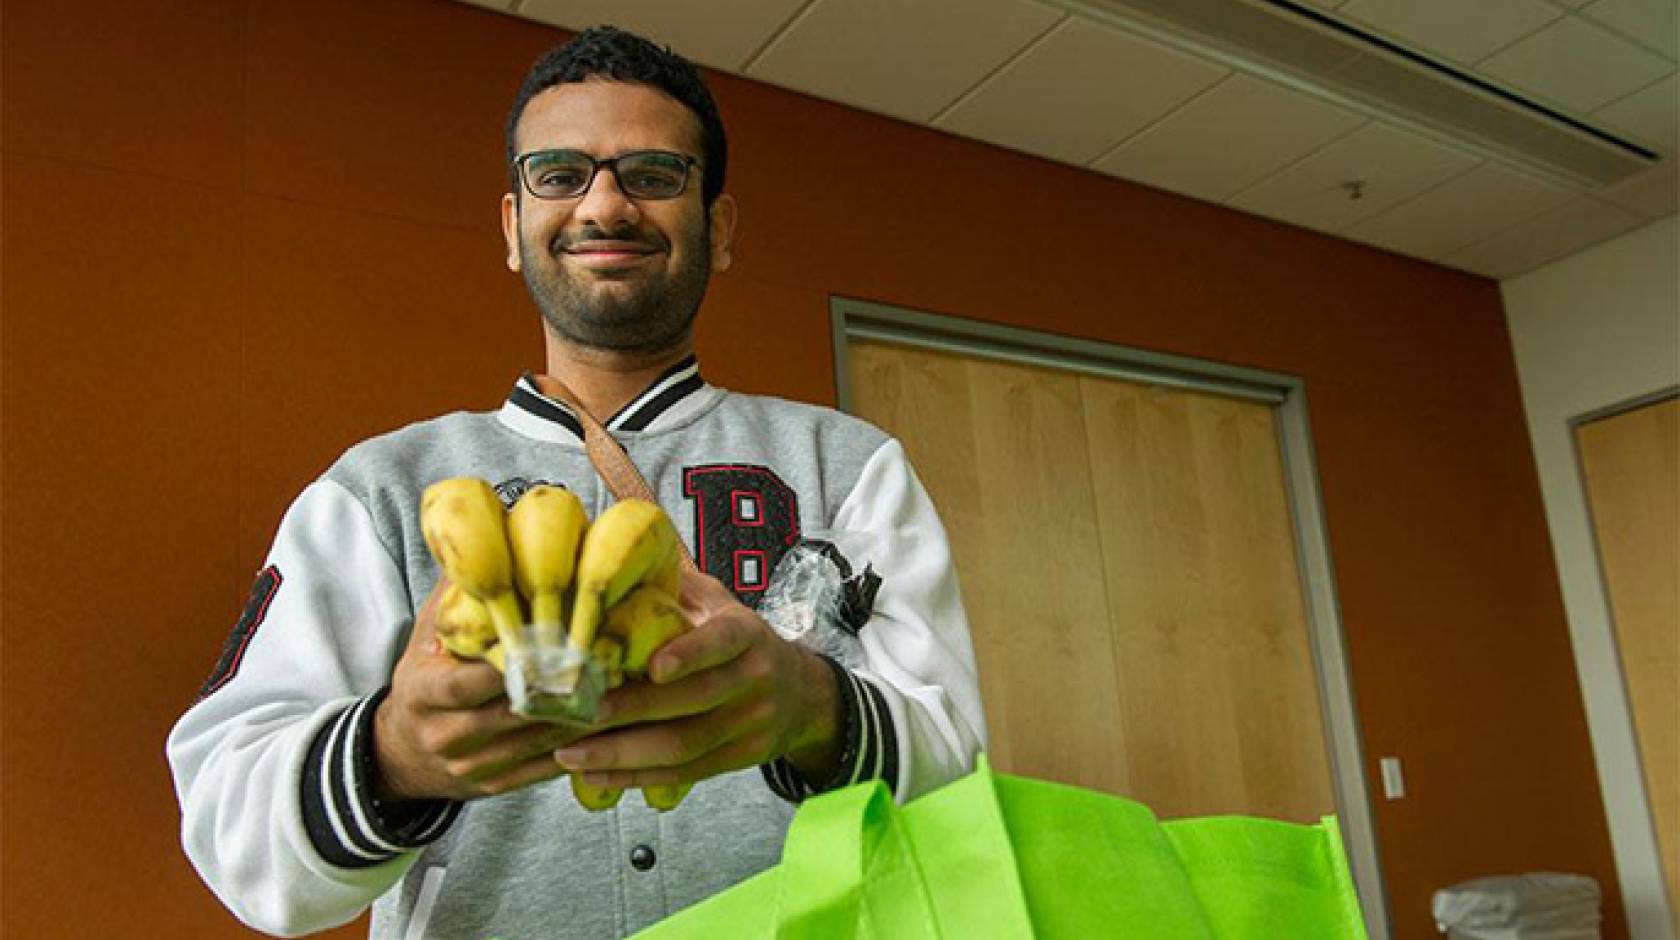 UC Davis graduate student Priyesh Shetty uses the free produce from the Fruit and Veggie Up! program to supplement his diet. 